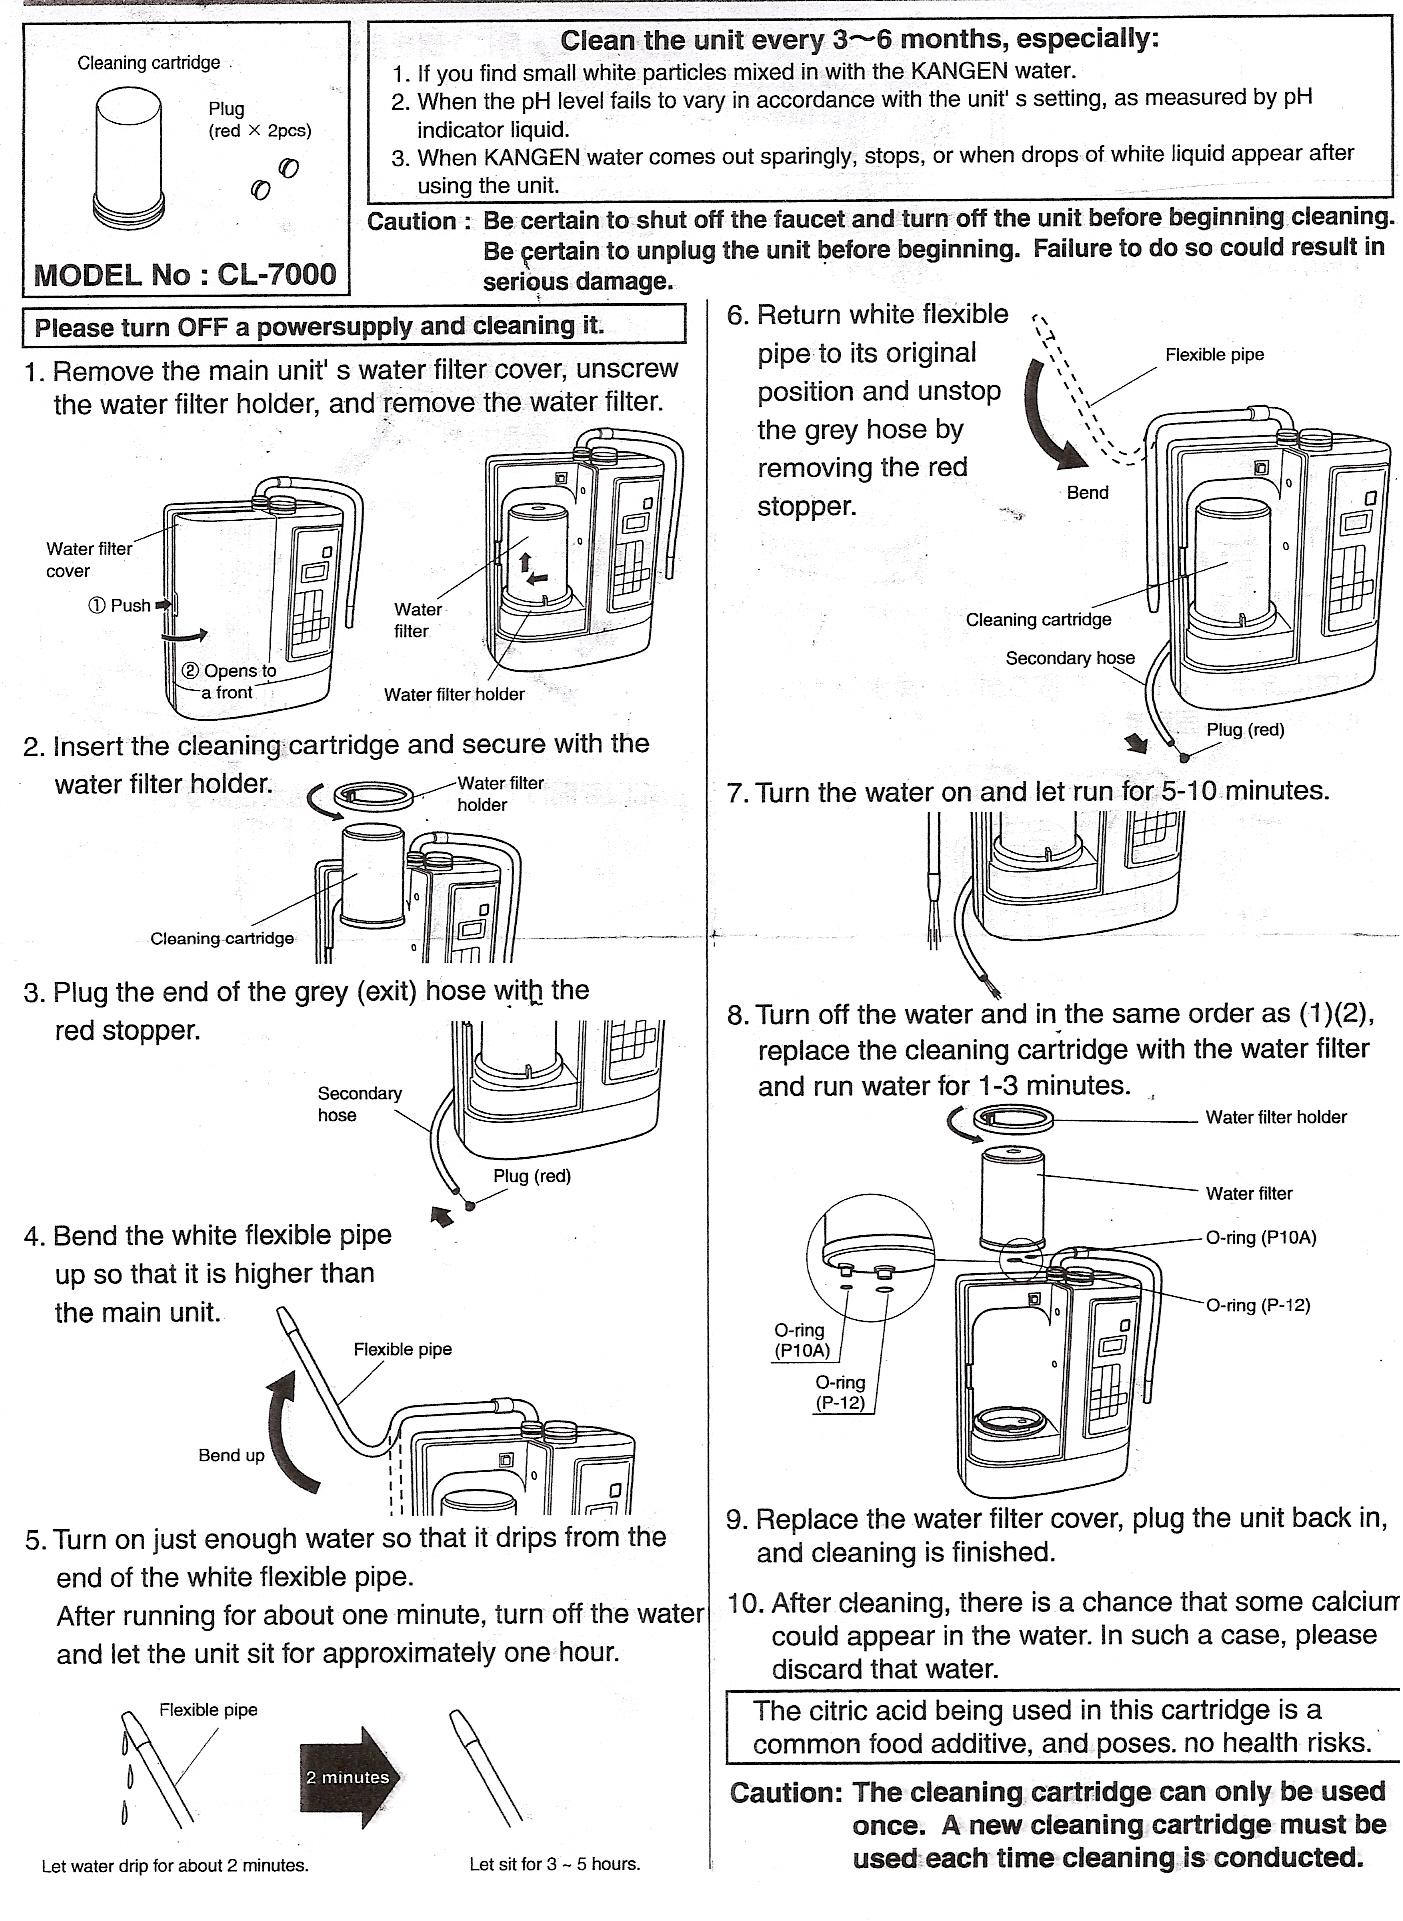 Instructions for kangen cleaning cartridge